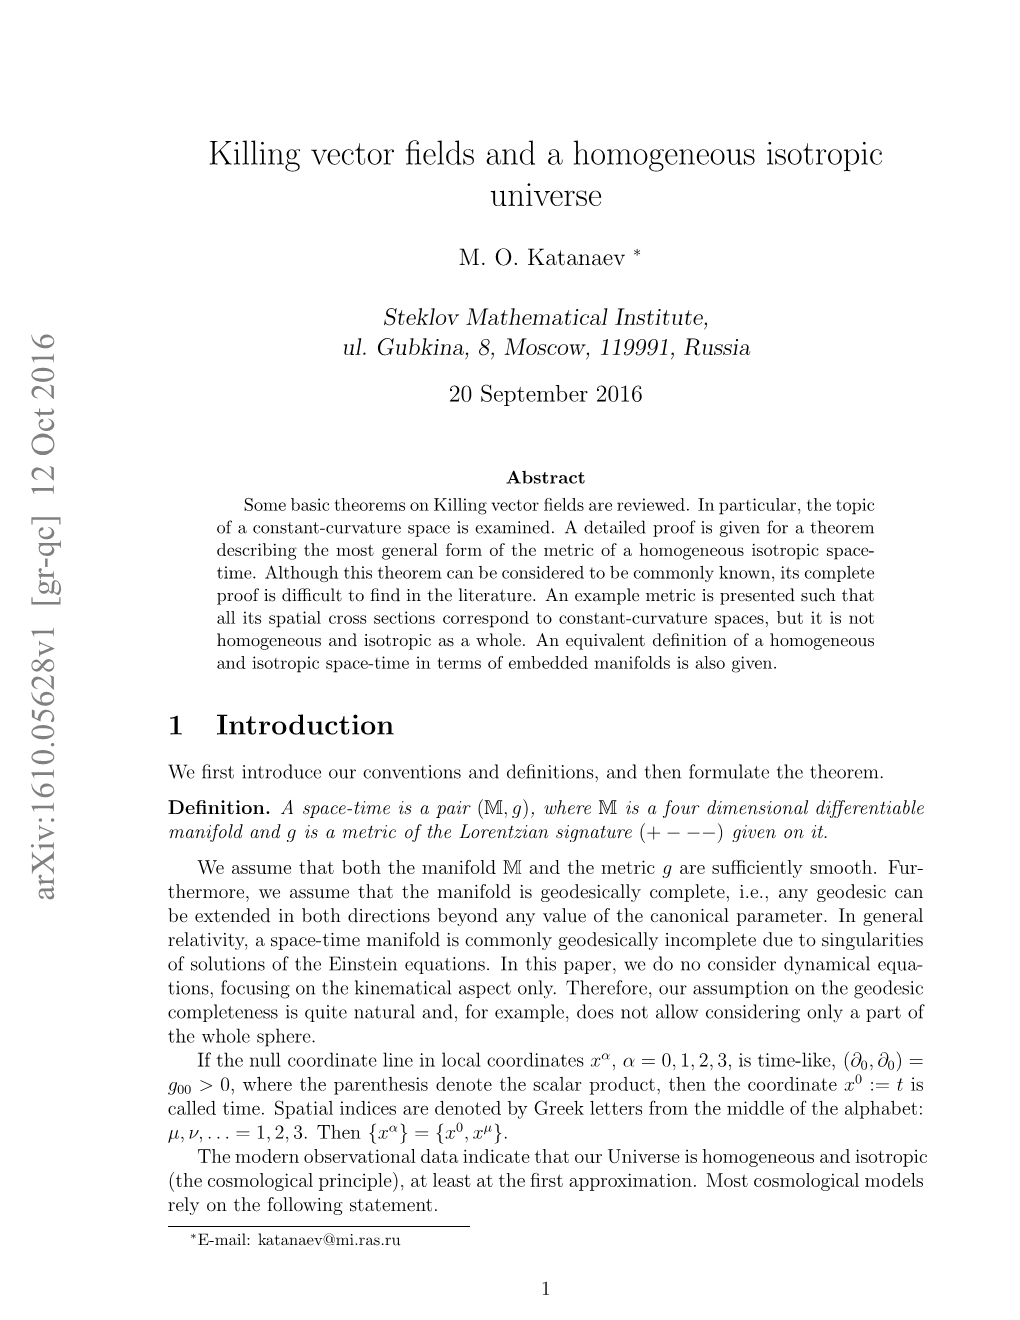 Killing Vector Fields and a Homogeneous Isotropic Universe